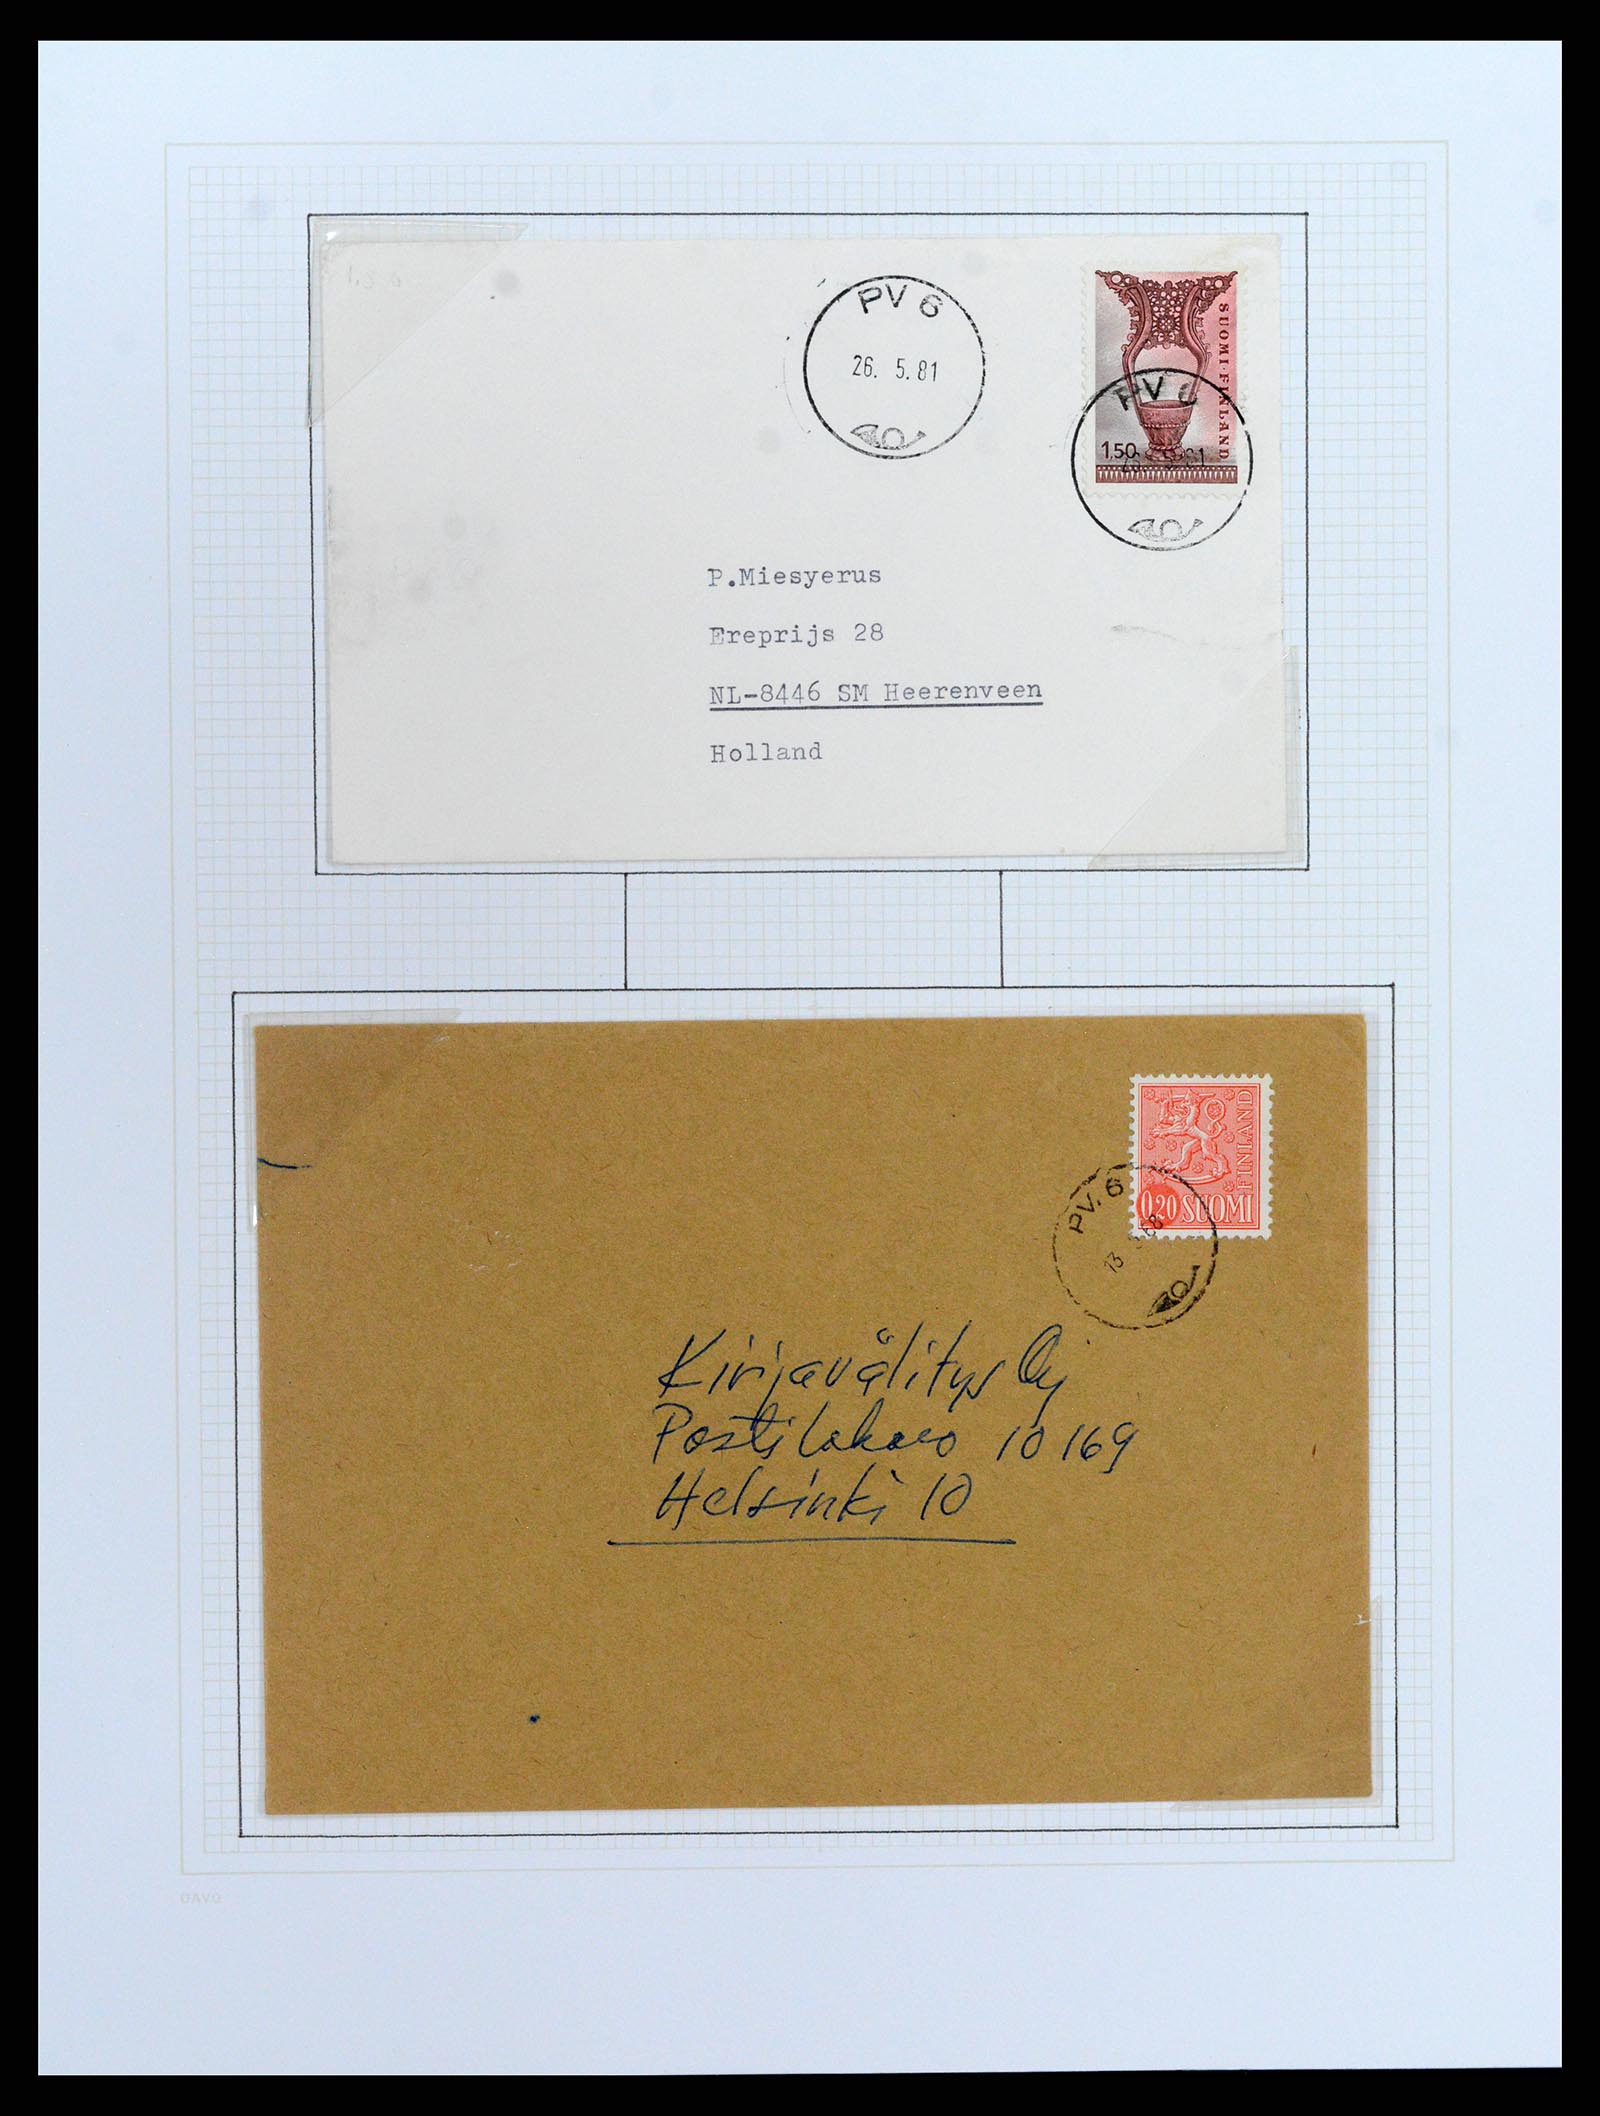 37766 044 - Stamp collection 37766 Finland railway cancellations 1870-1950.